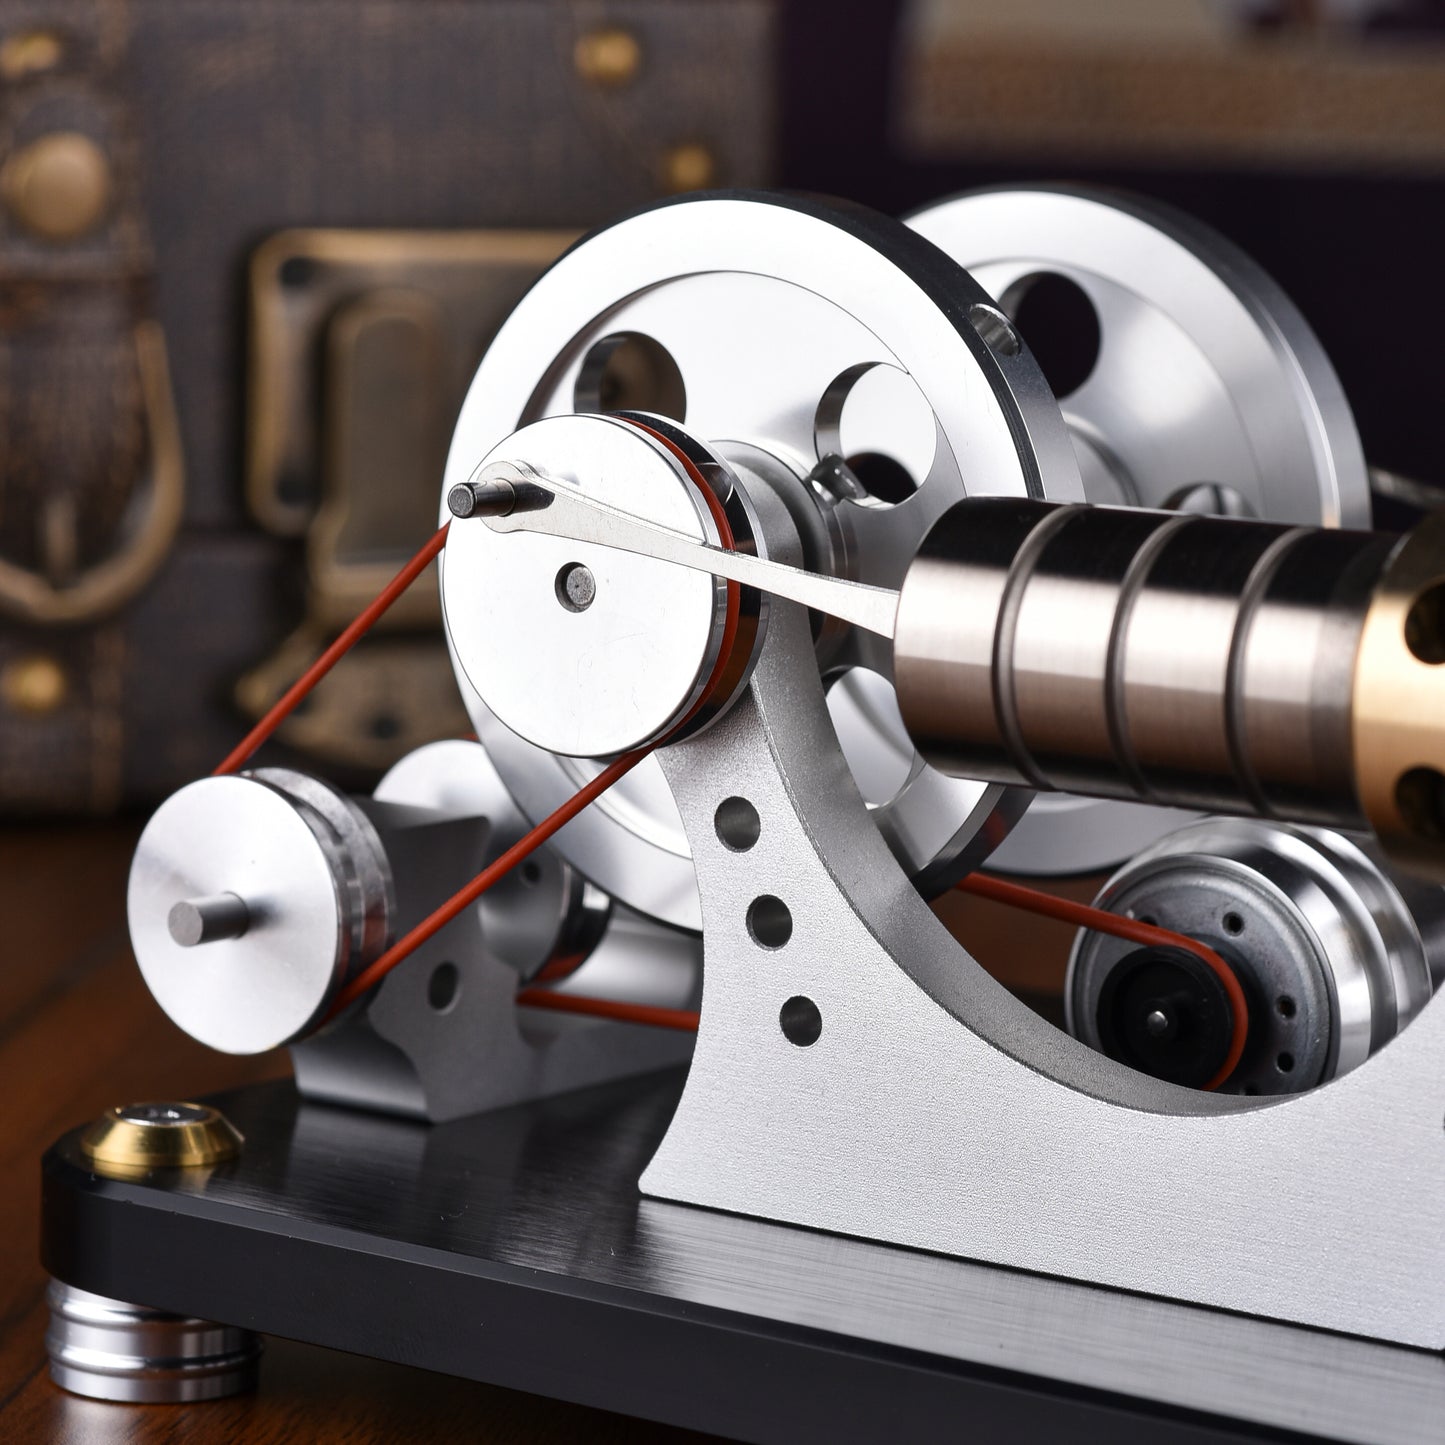 Stirling Engine Model - A Synthesis of Elegance and Mechanical Precision (M16-22-D)